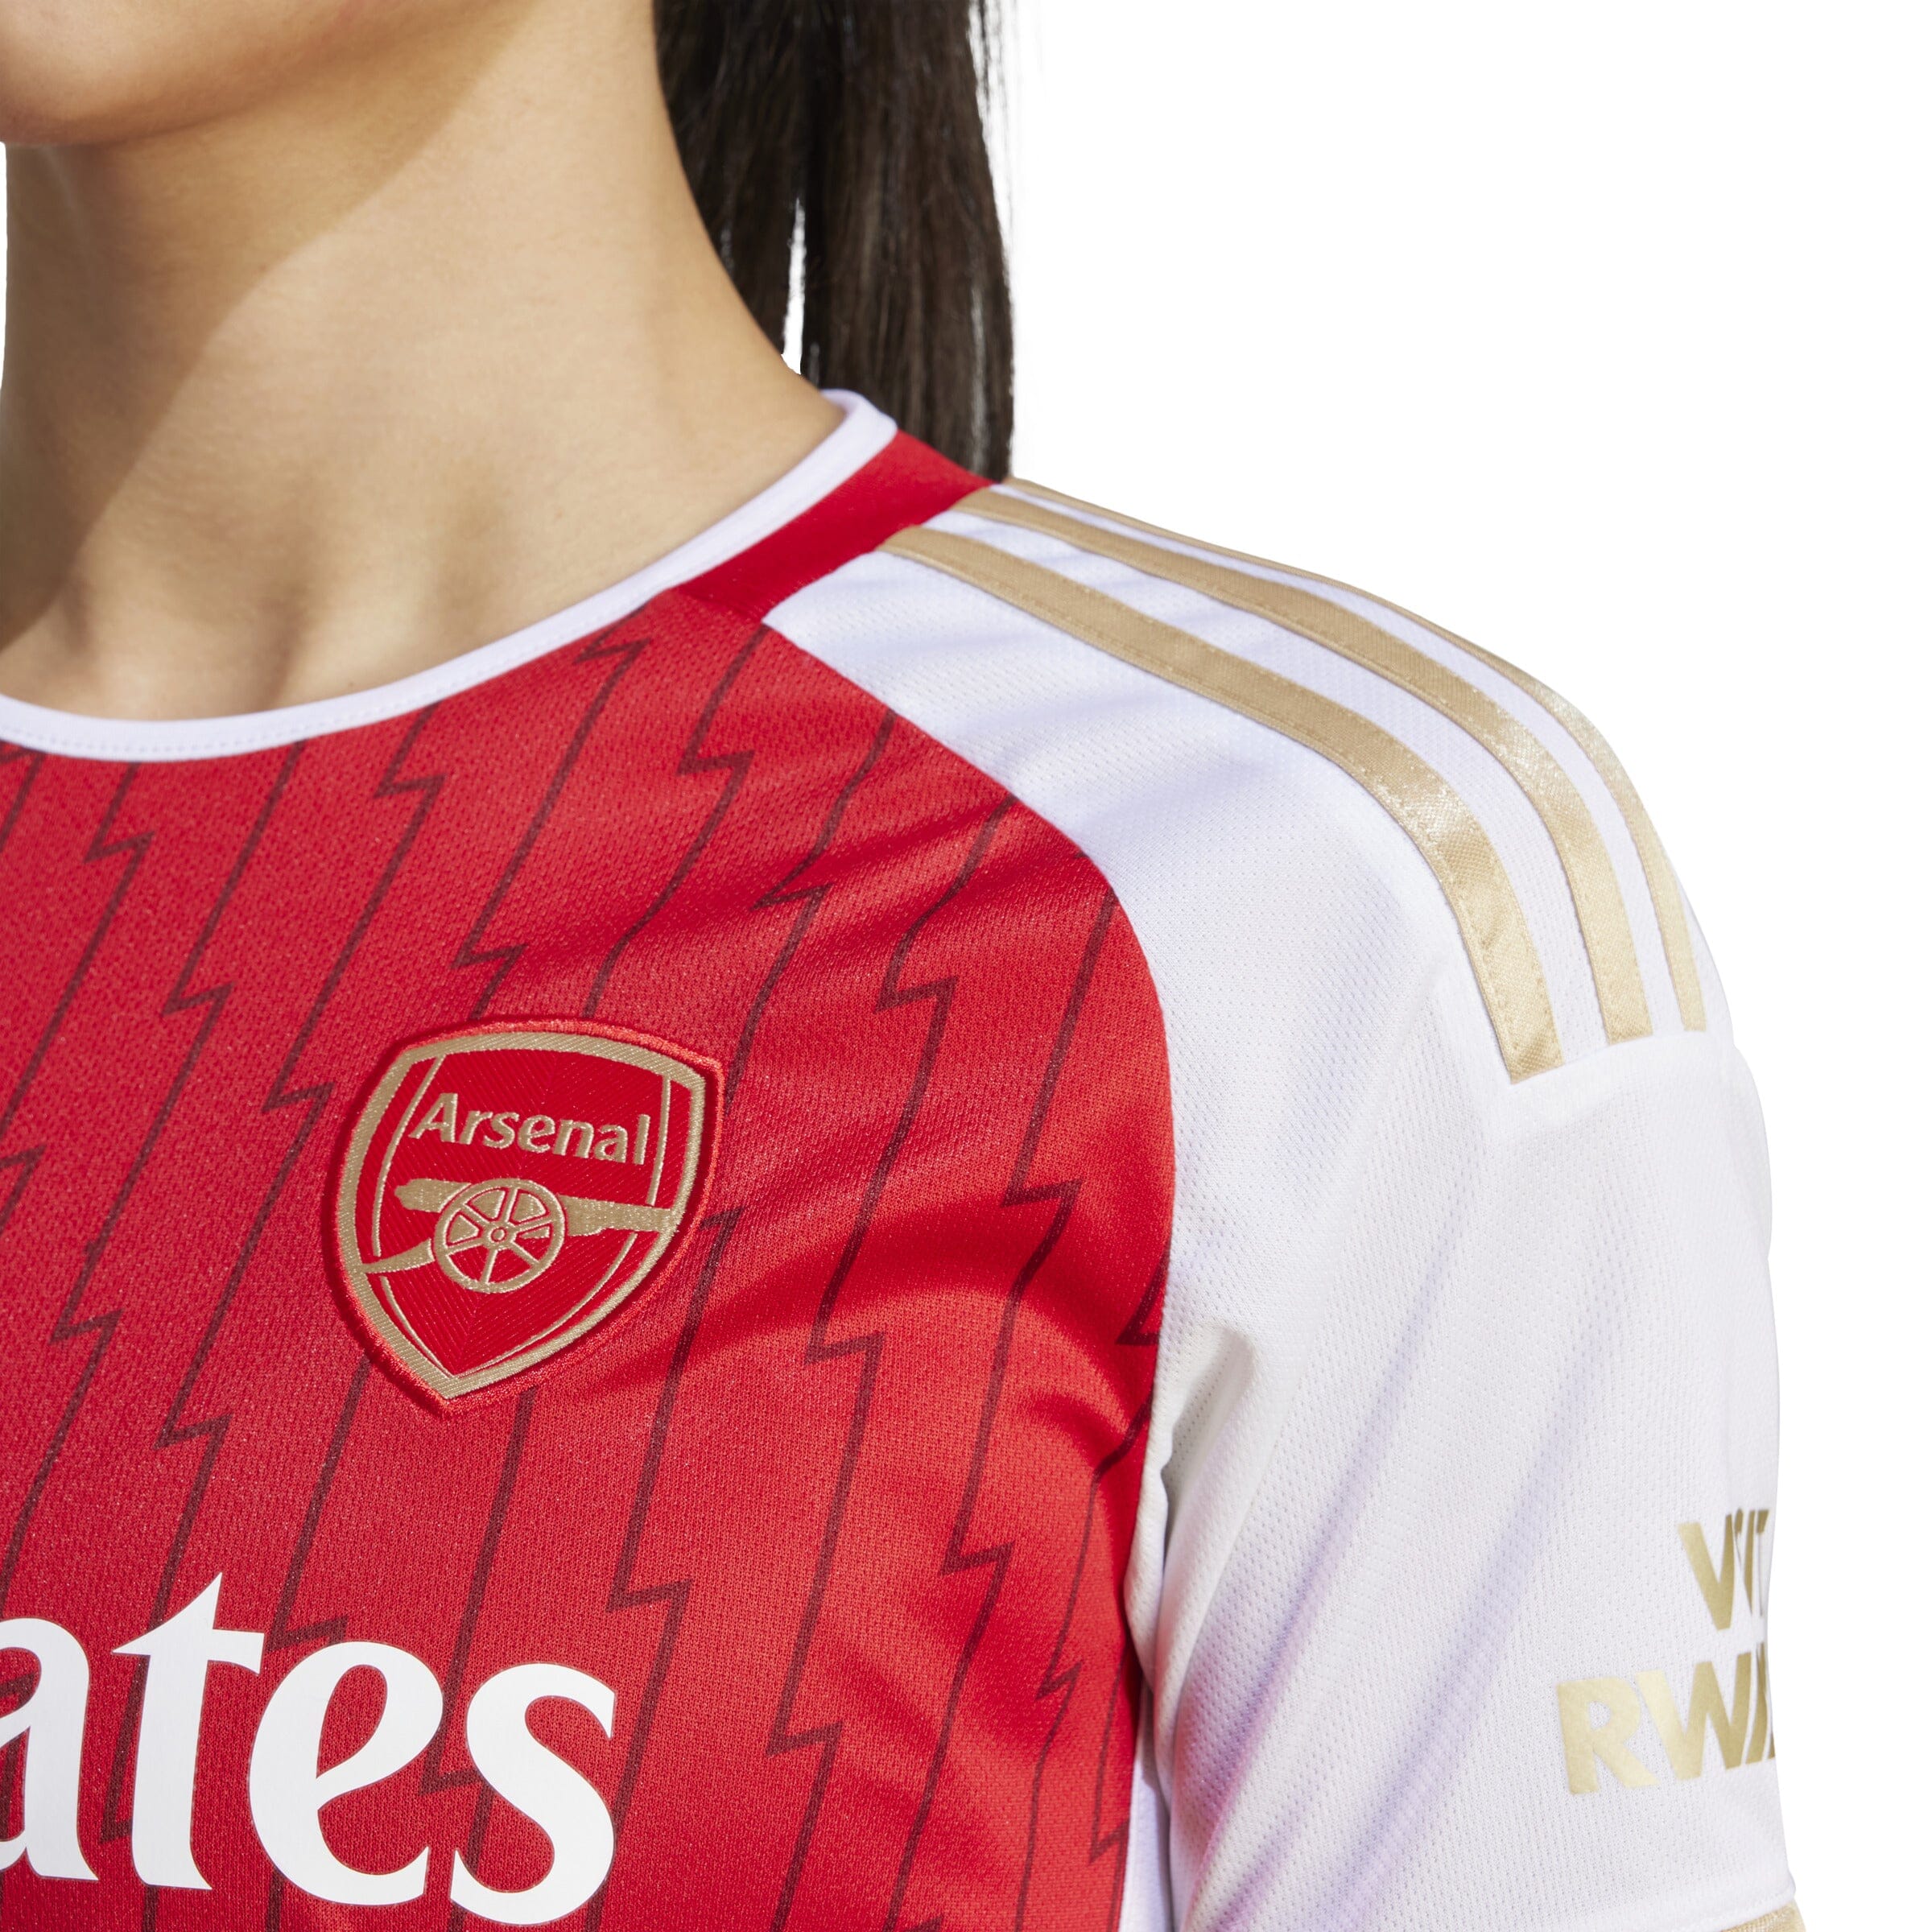 adidas Arsenal 23/24 Home Jersey - Red, Women's Soccer